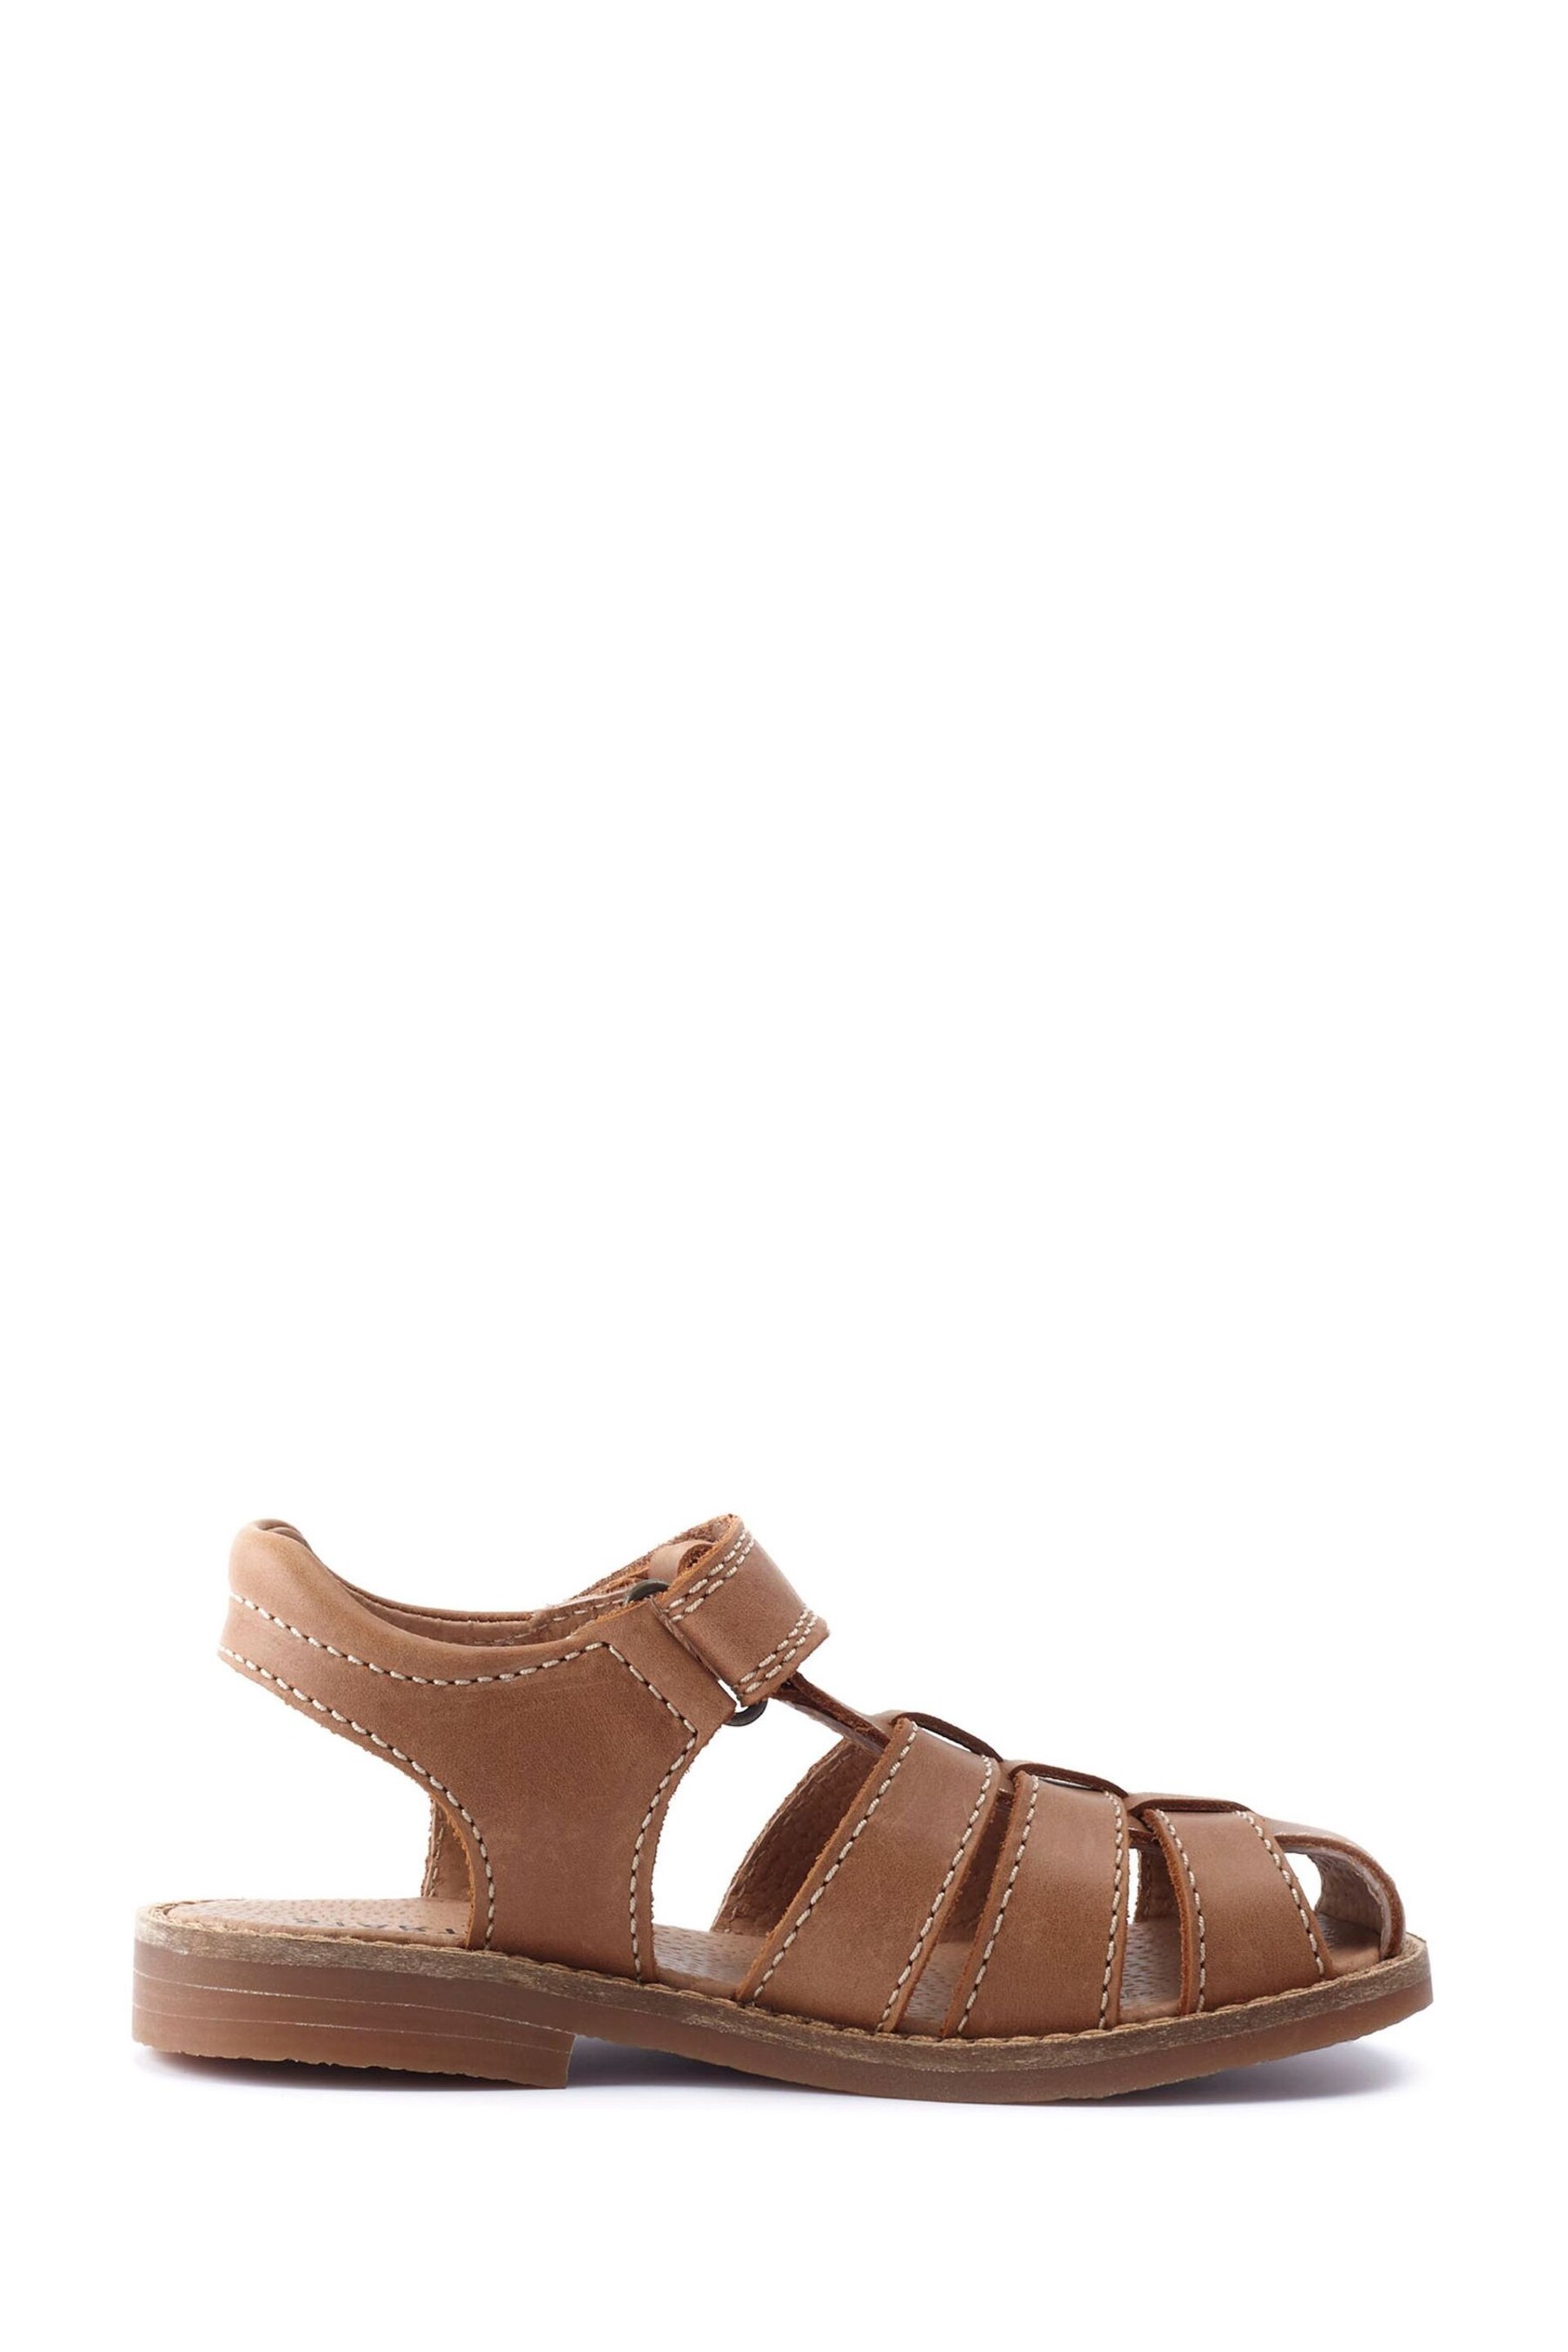 Start Rite Tan Brown Pier Leather Classic Riptape Sandals Standard Width Fitting - Image 2 of 6